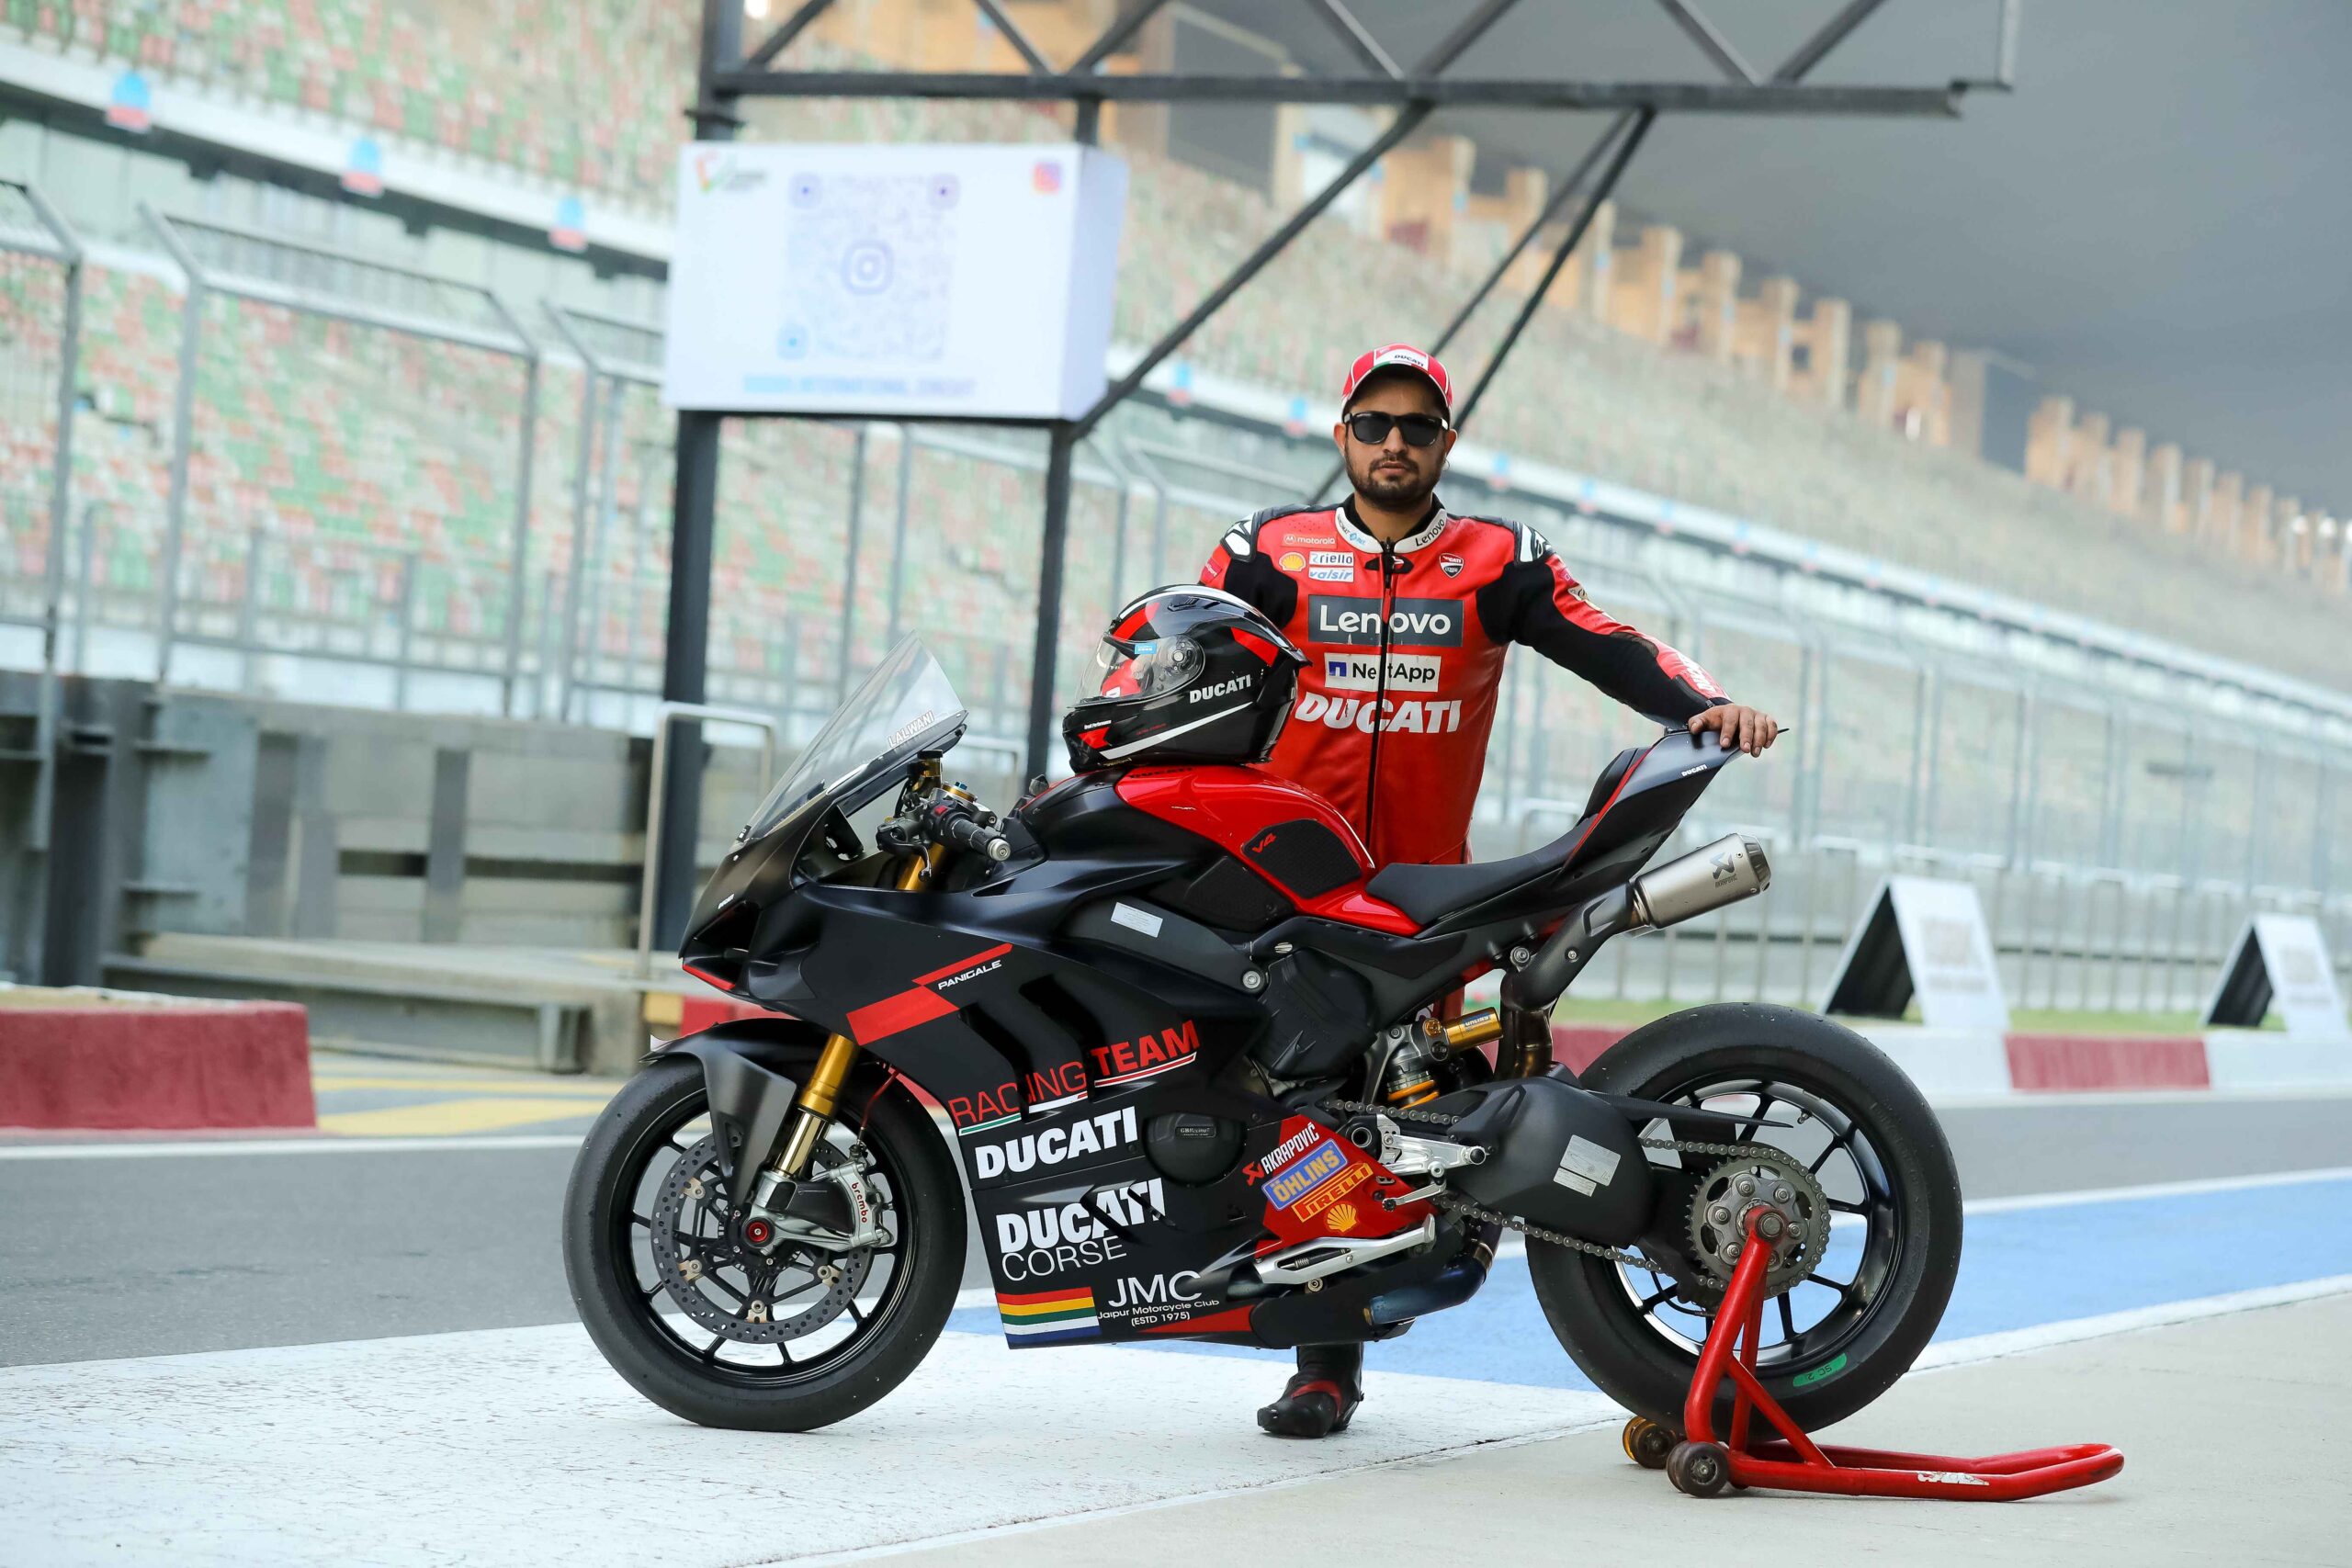 Ducati India Rider and Official DRE Instructor Sets Record AT BIC